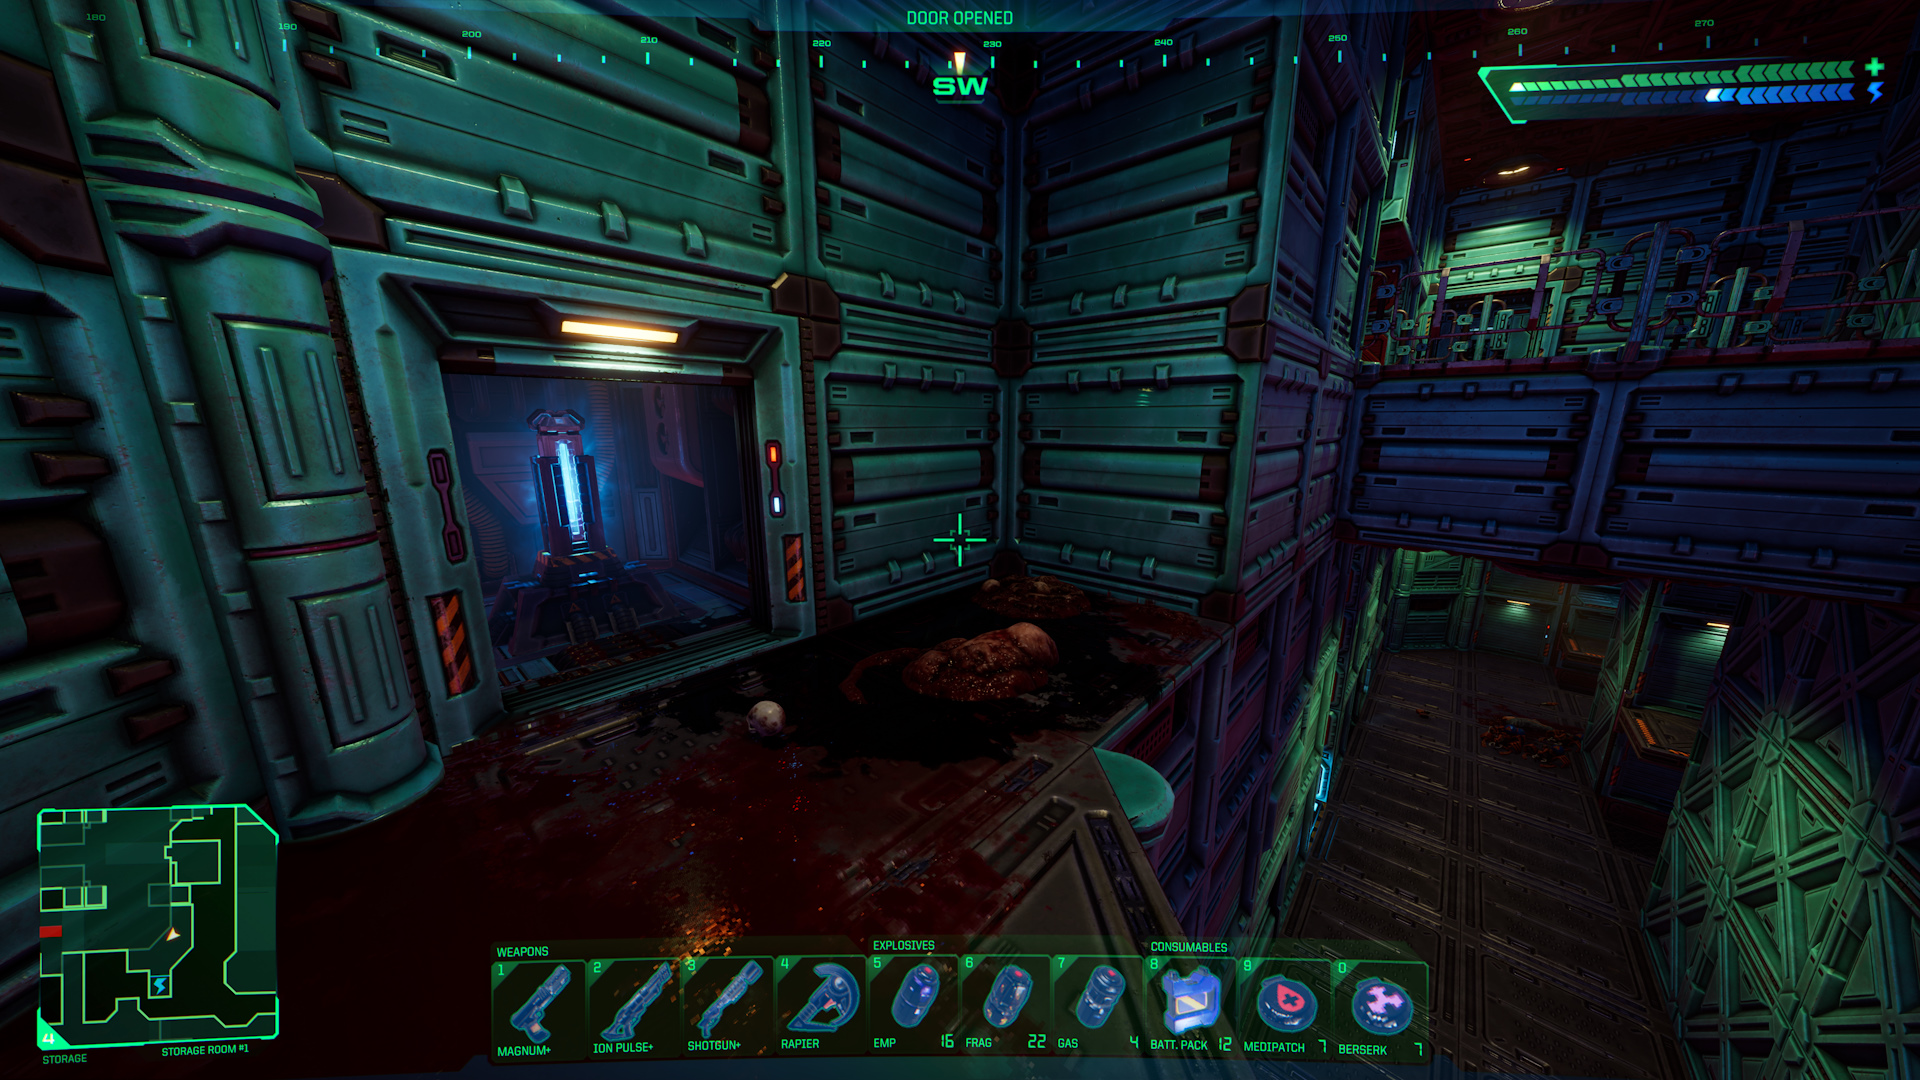 System Shock - Guide to all hidden doors in game - L4 - Storage - D68F863